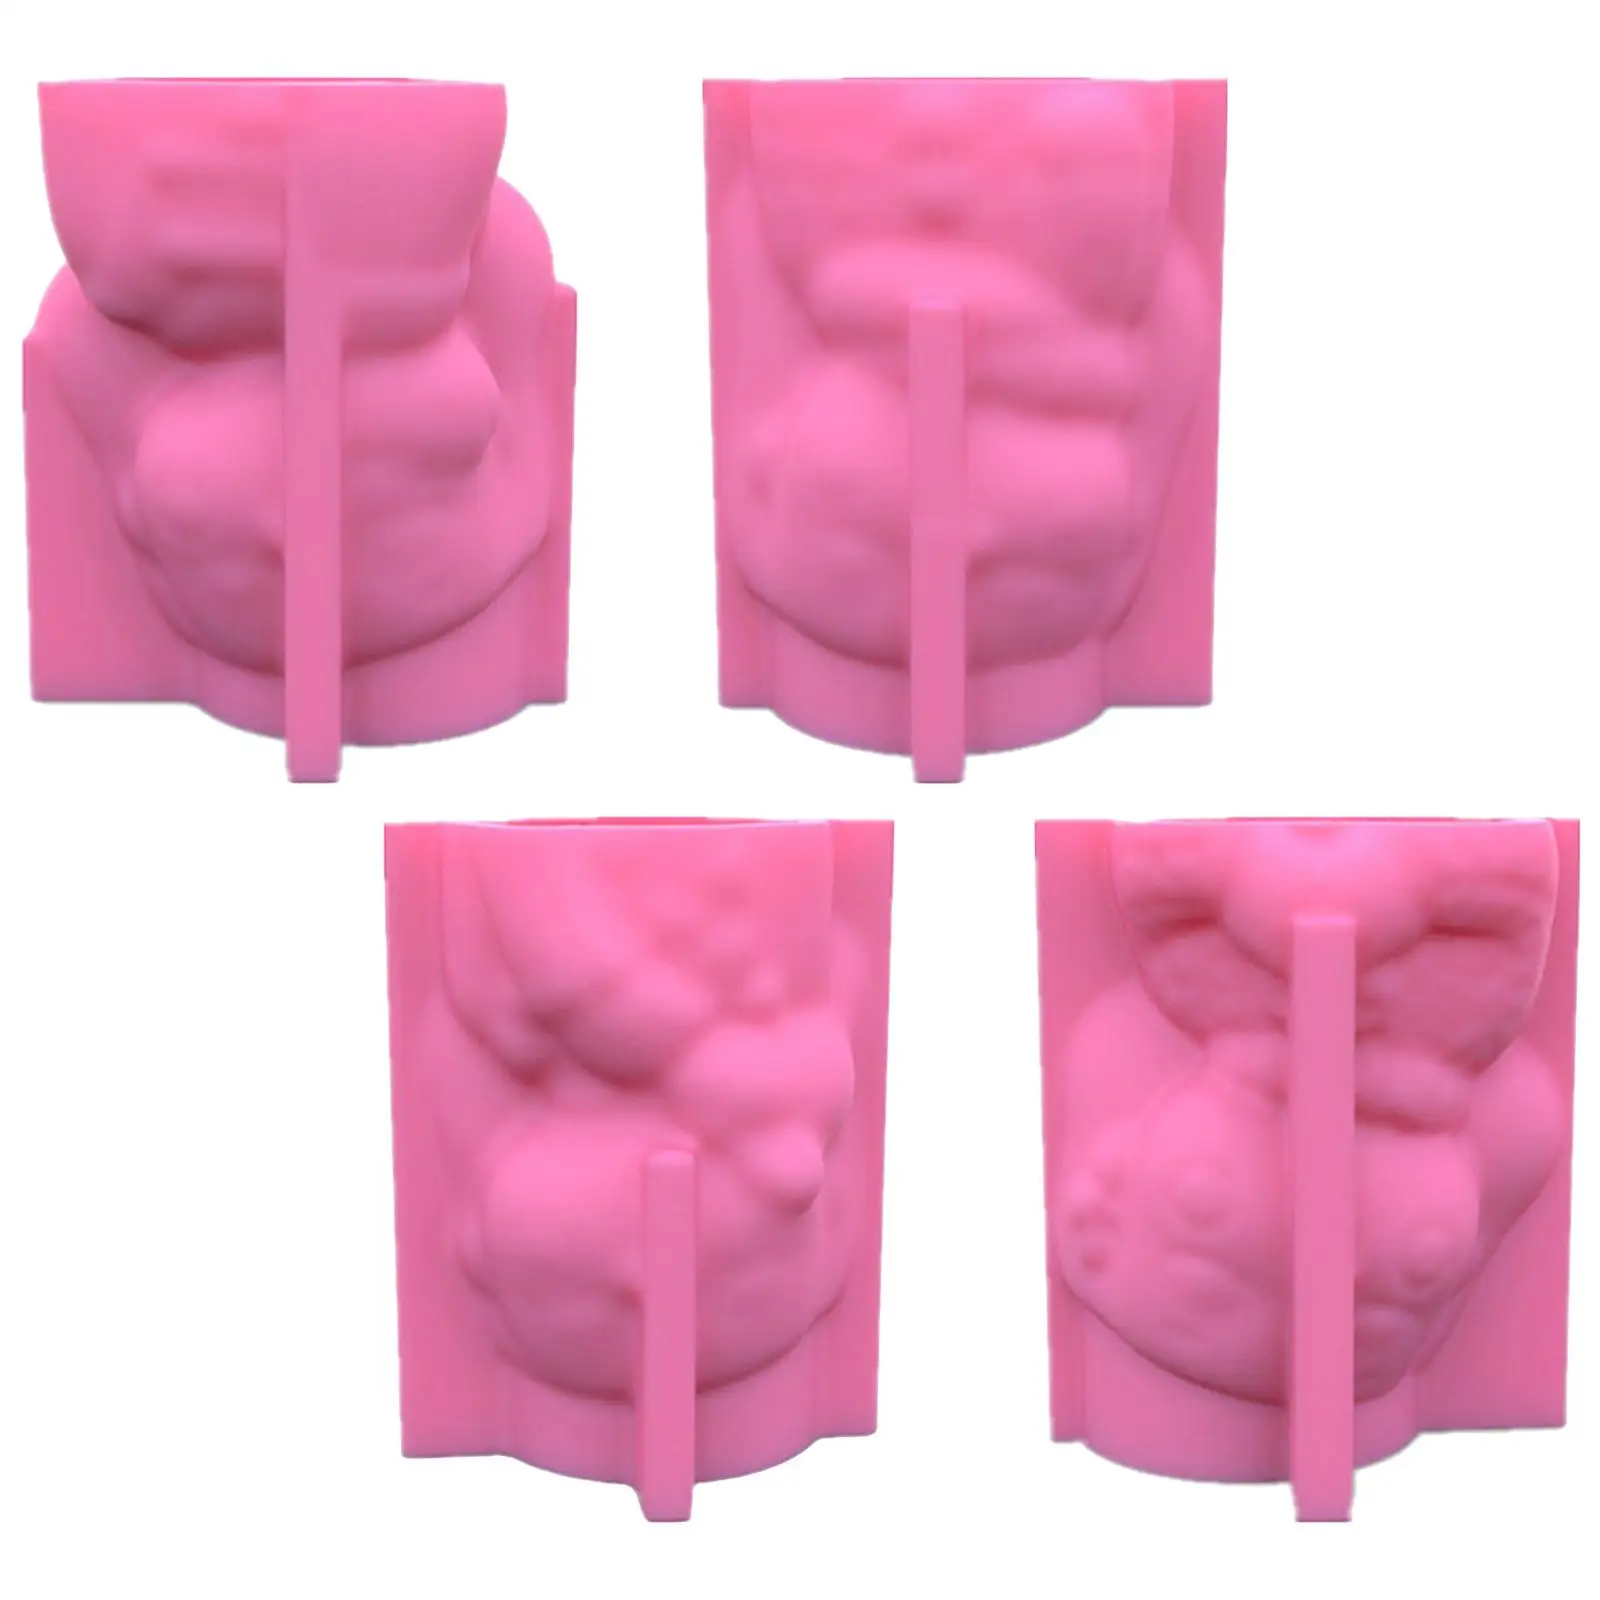 Cute Girl Head Silicone Mold Epoxy Resin Flower Pot Moulds Plant Pots Handmade Art Crafts Succulent Planter Molds Polymer Moulds